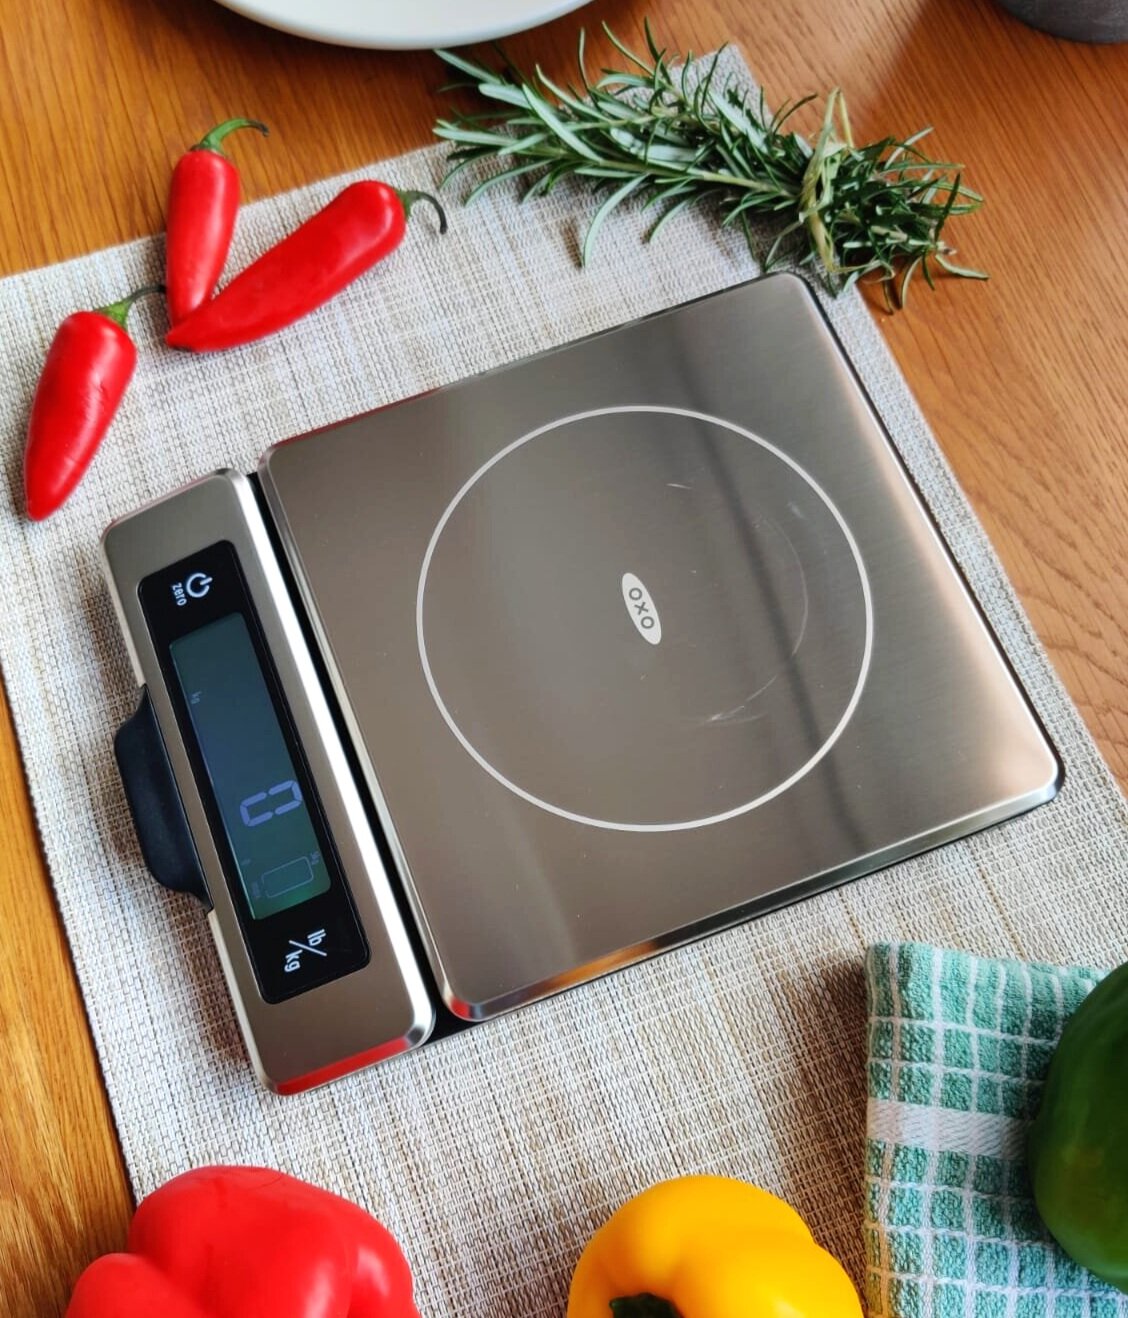 Luxury Kitchen Gadgets - Review — Her Favourite Food & Travel